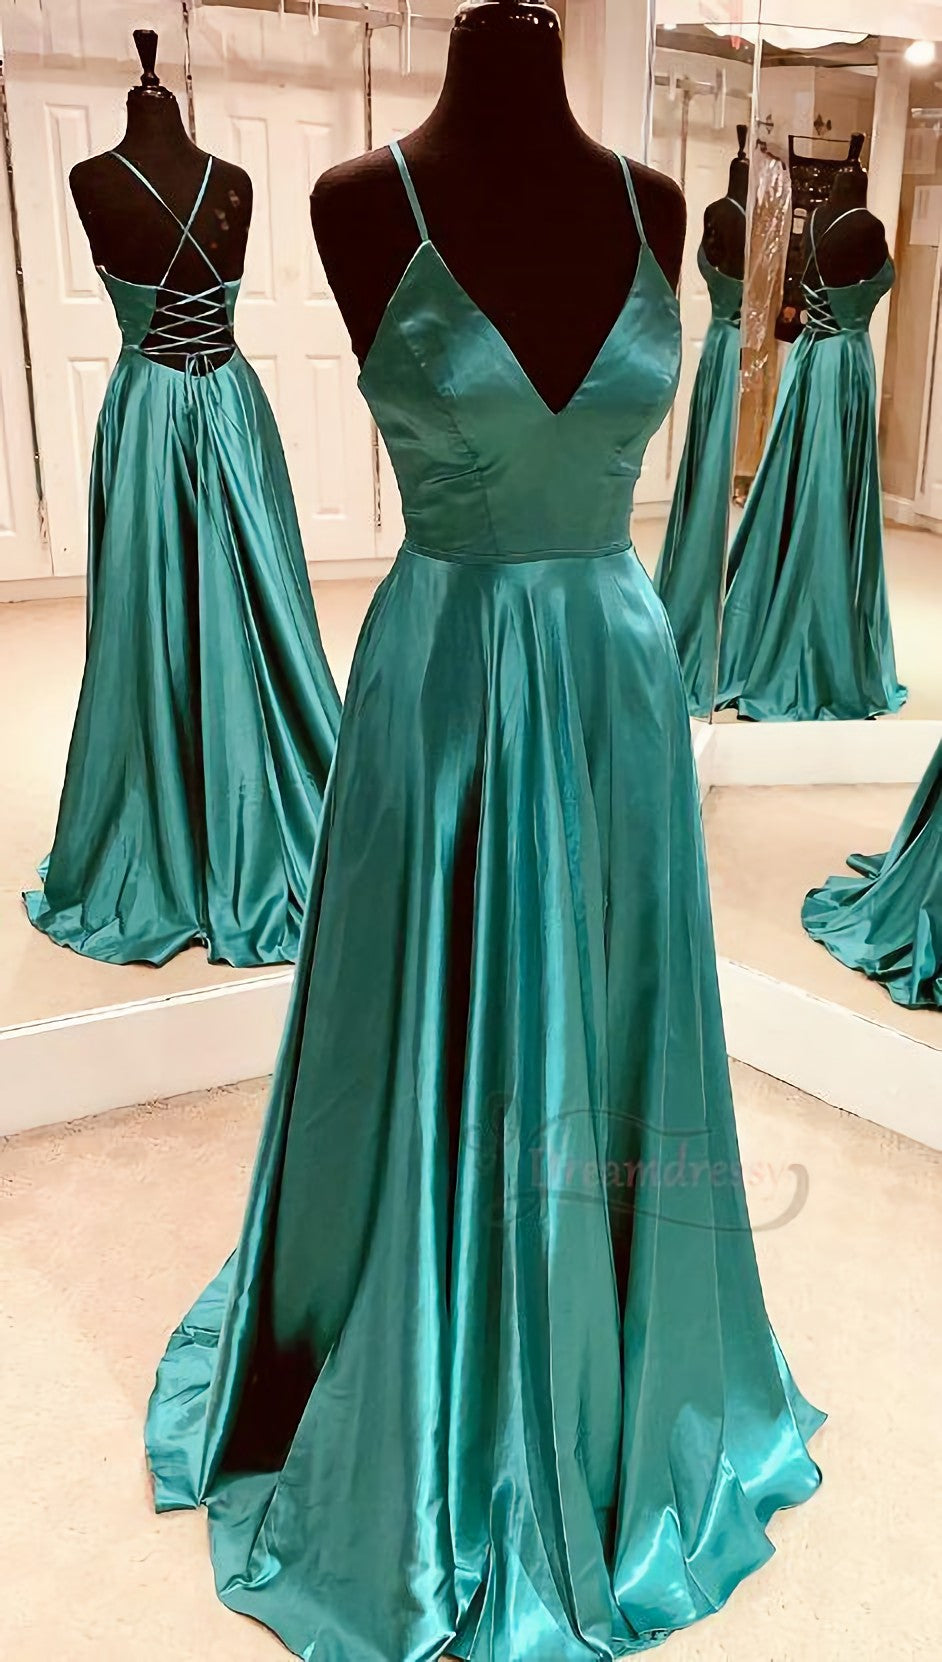 Simple A Line V Neck Teal Long Corset Prom Dress, With Lace Up Back Gowns, Homecomming Dress Vintage